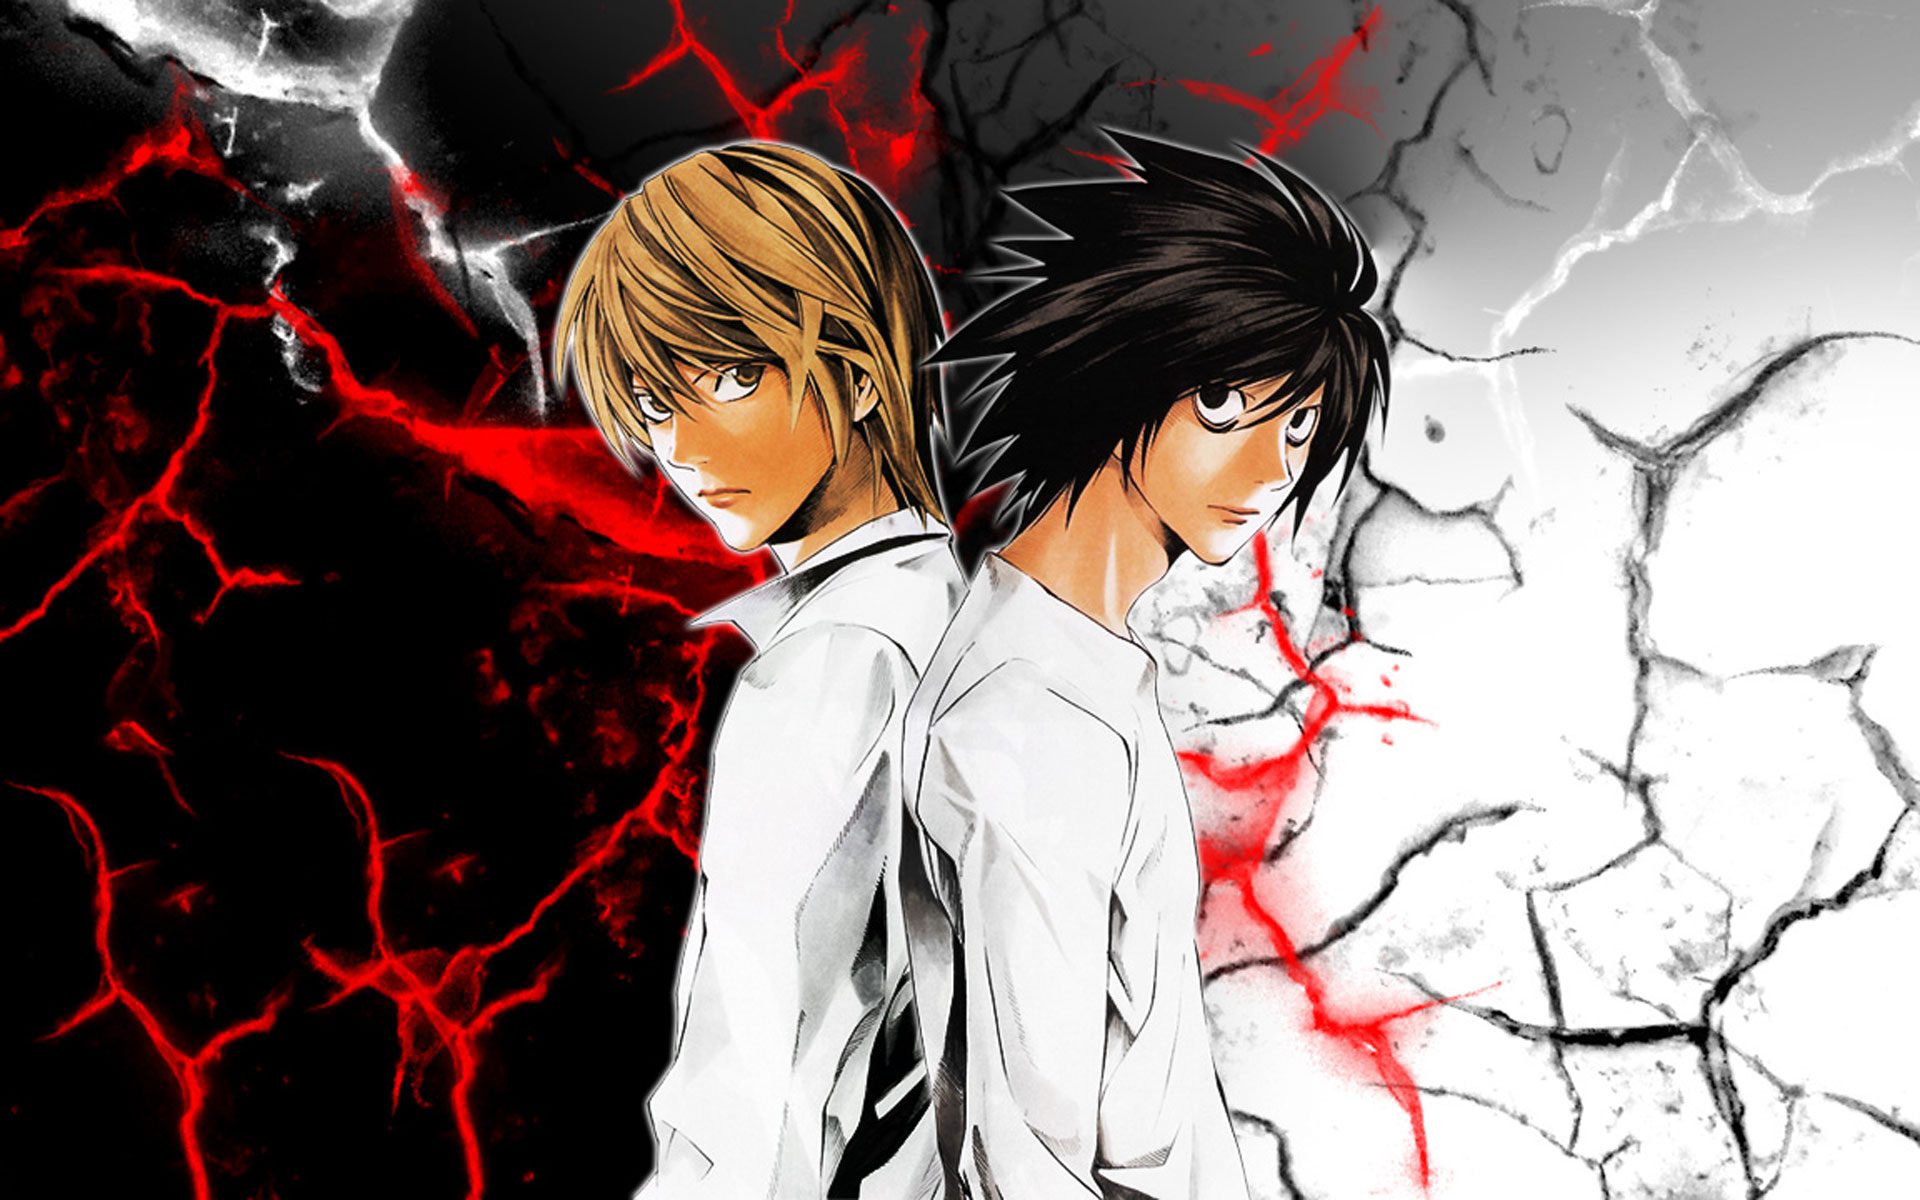 Free HD light yagami, death note, anime, l (death note)